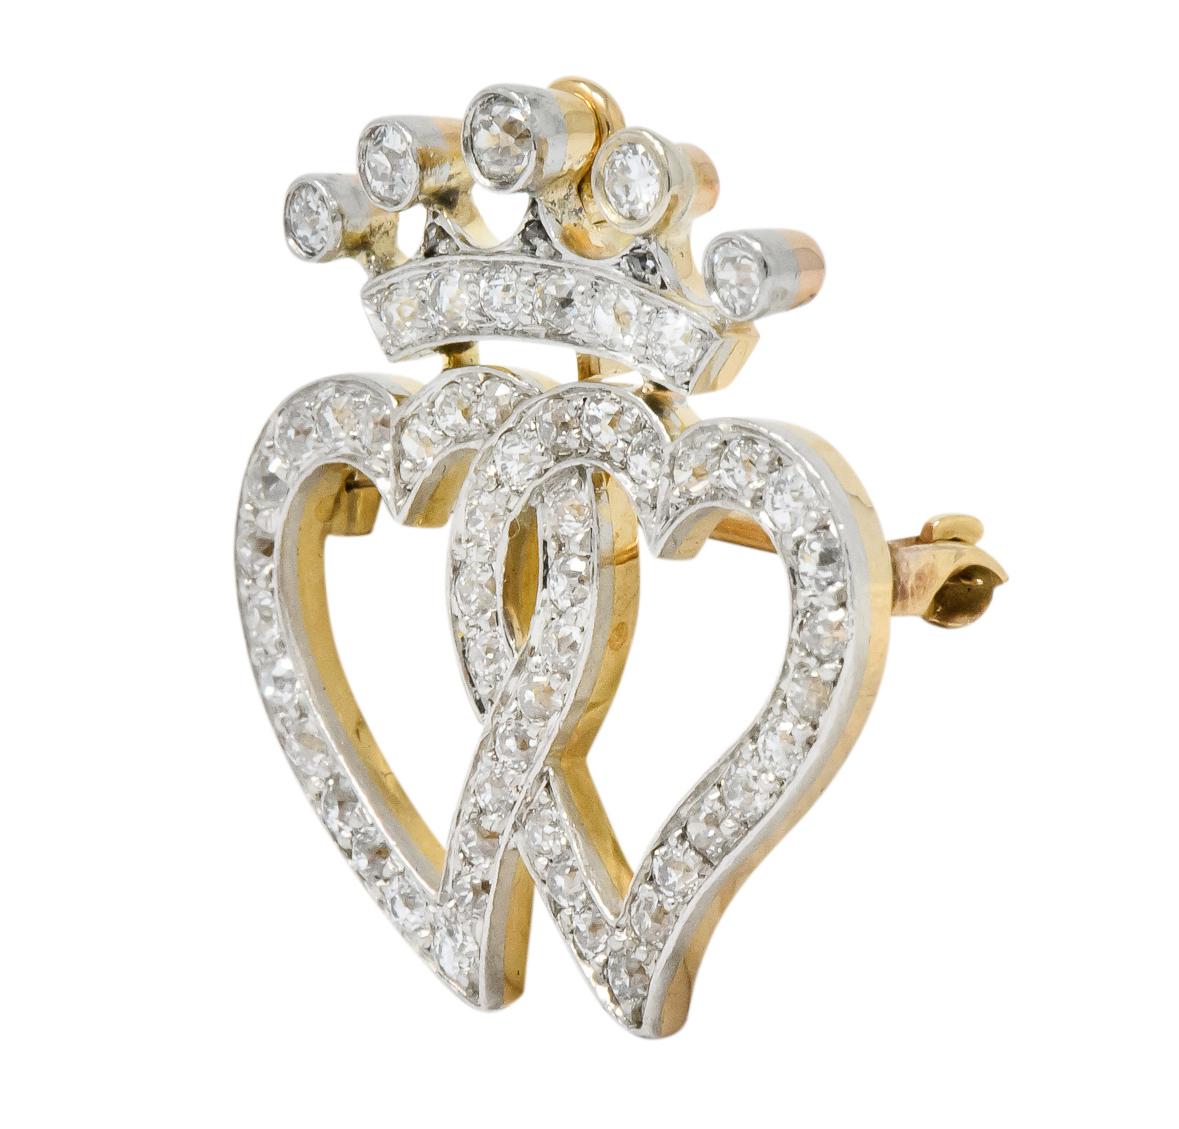 Designed as two crowned open hearts, intertwined

Set throughout with old European cut diamonds weighing approximately 1.35 carats total, H to J color and VS clarity

Completed by sliding hidden bale and pin stem with locking closure

Tested as